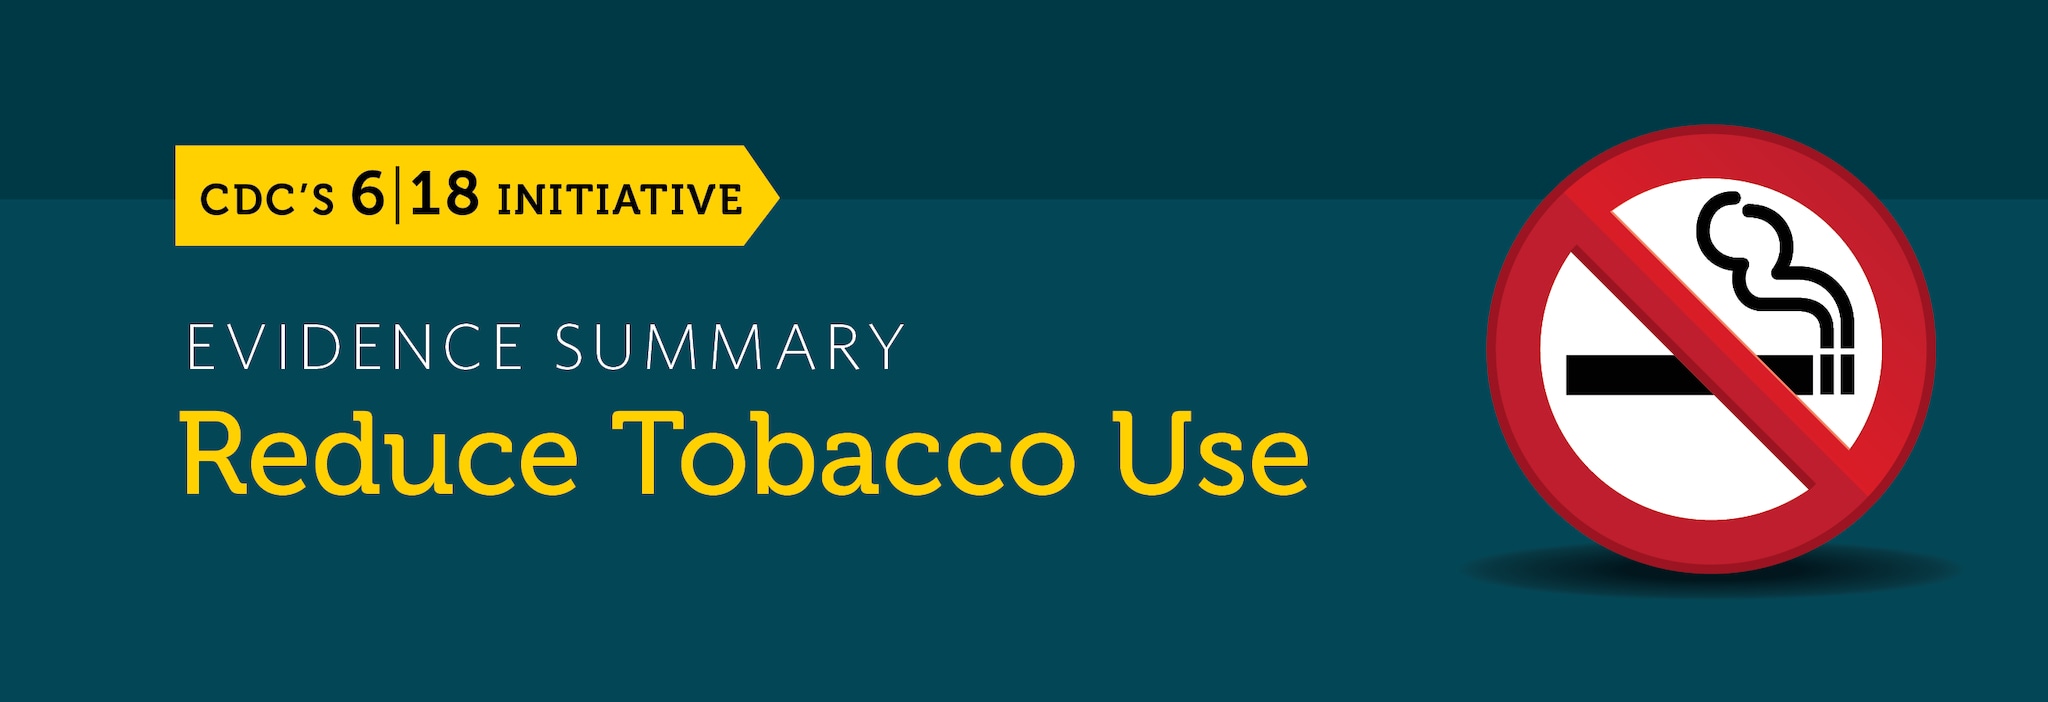 The reduce tobacco use evidence summary banner.